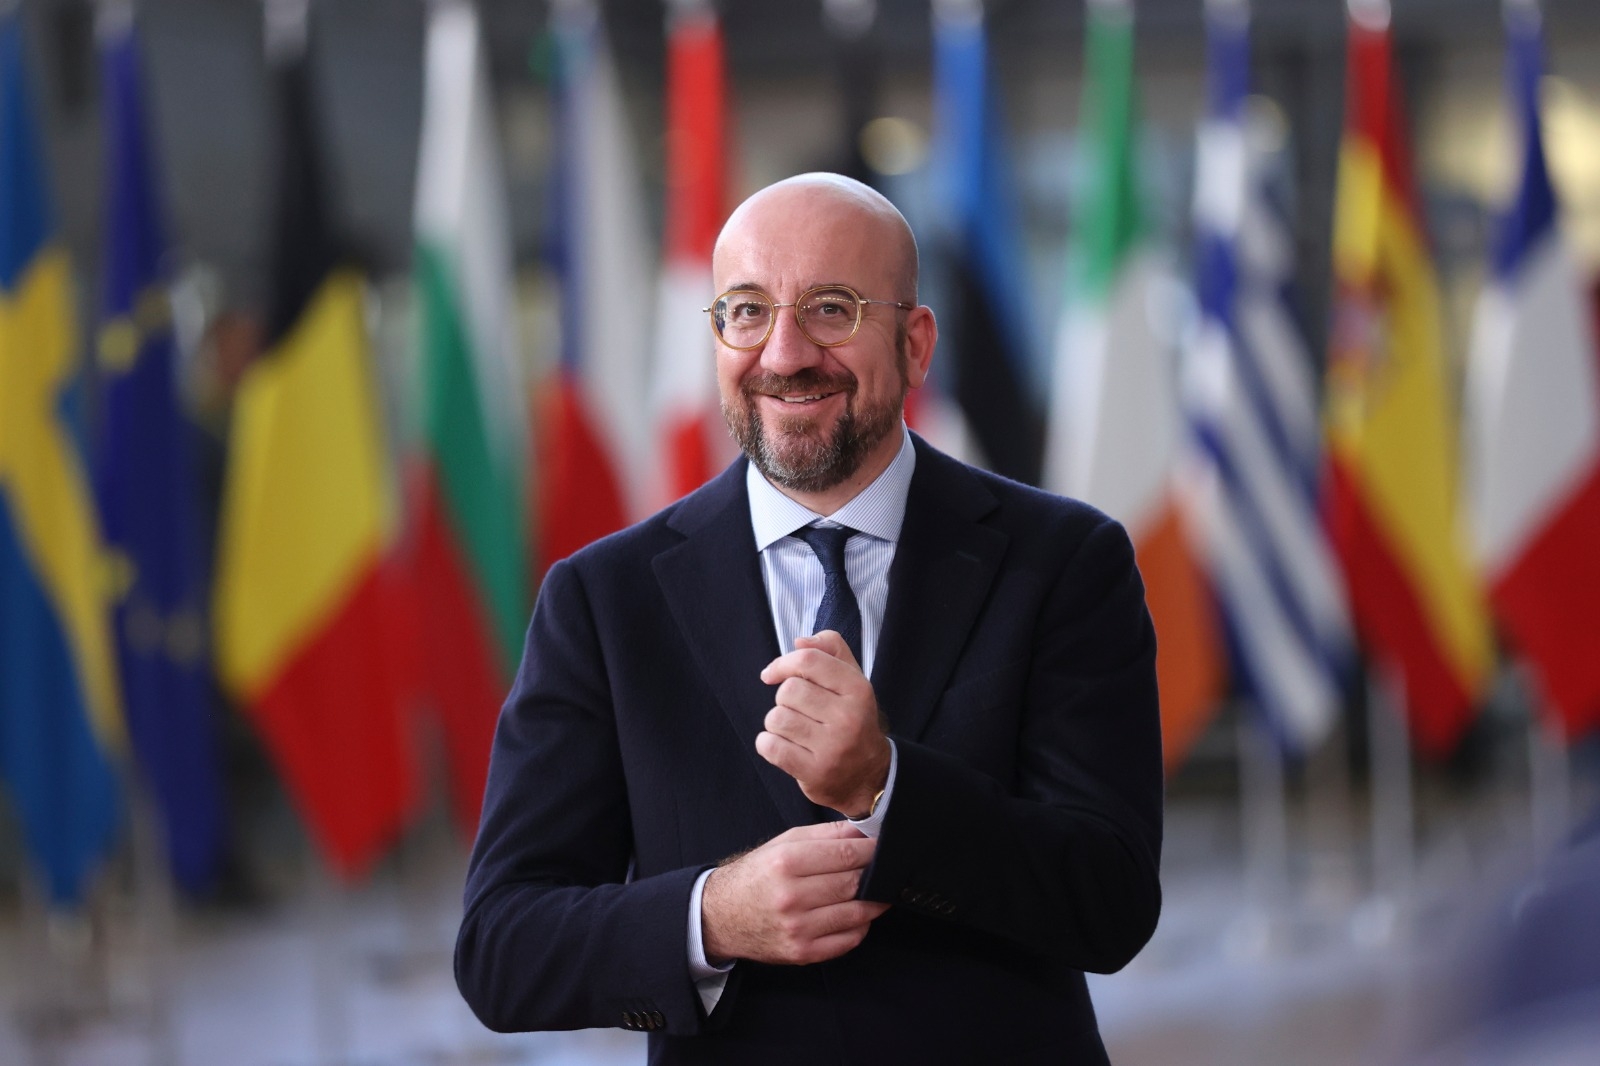 Charles Michel, the President of the European Council will leave the position prematurely